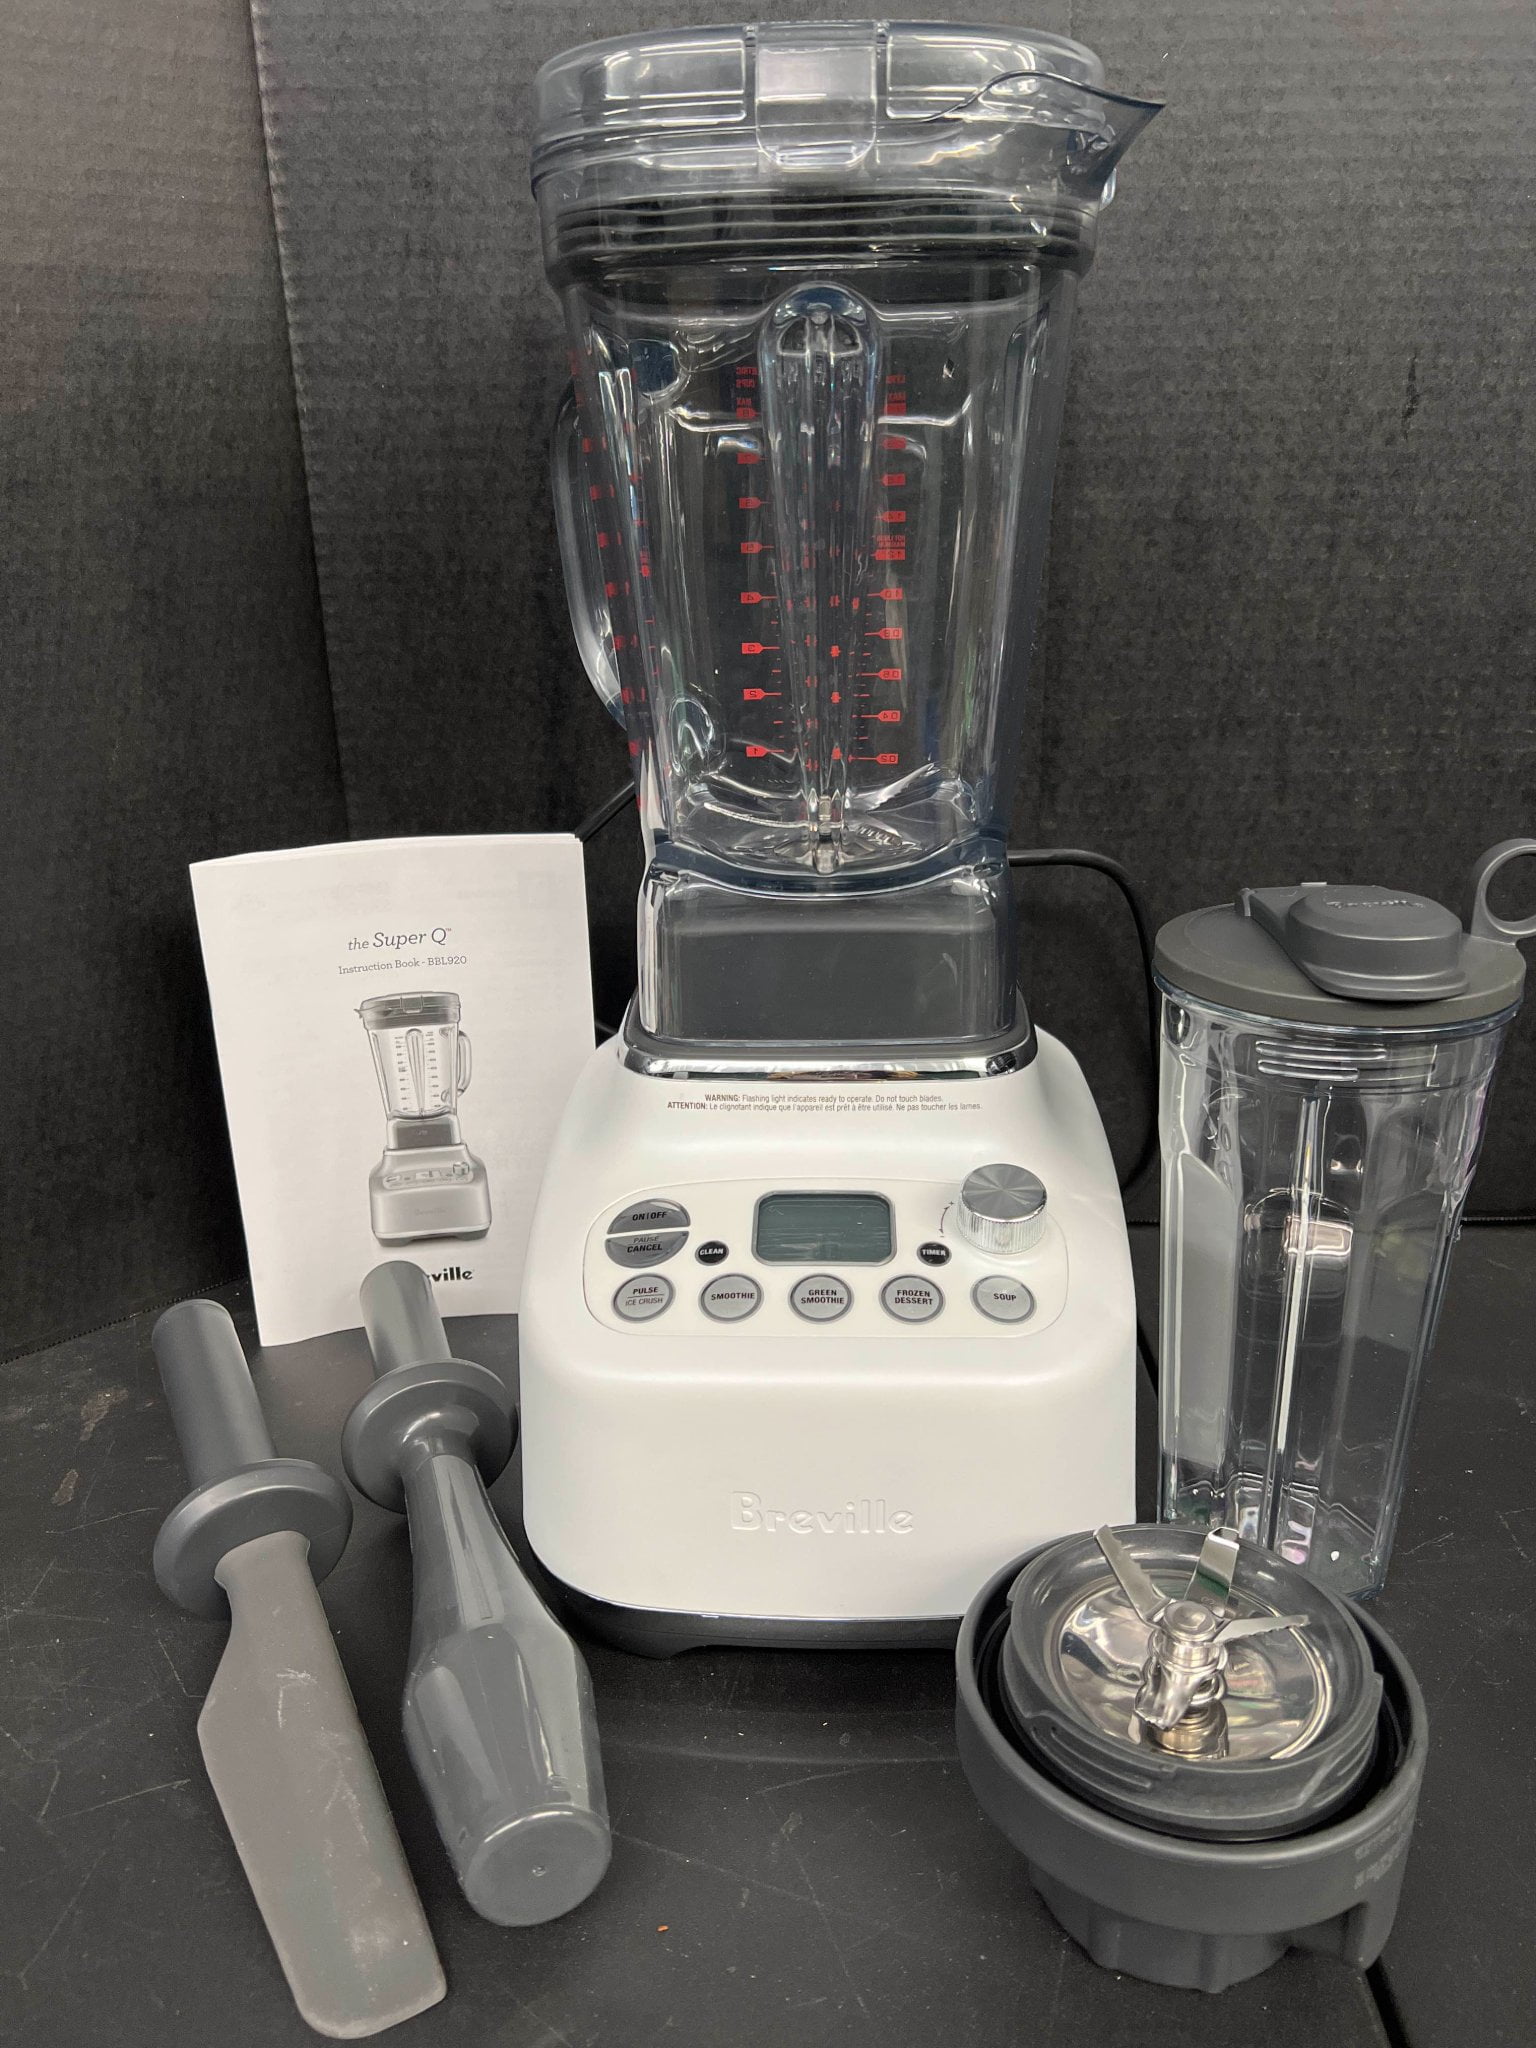 Breville Super Q comes with many accessories